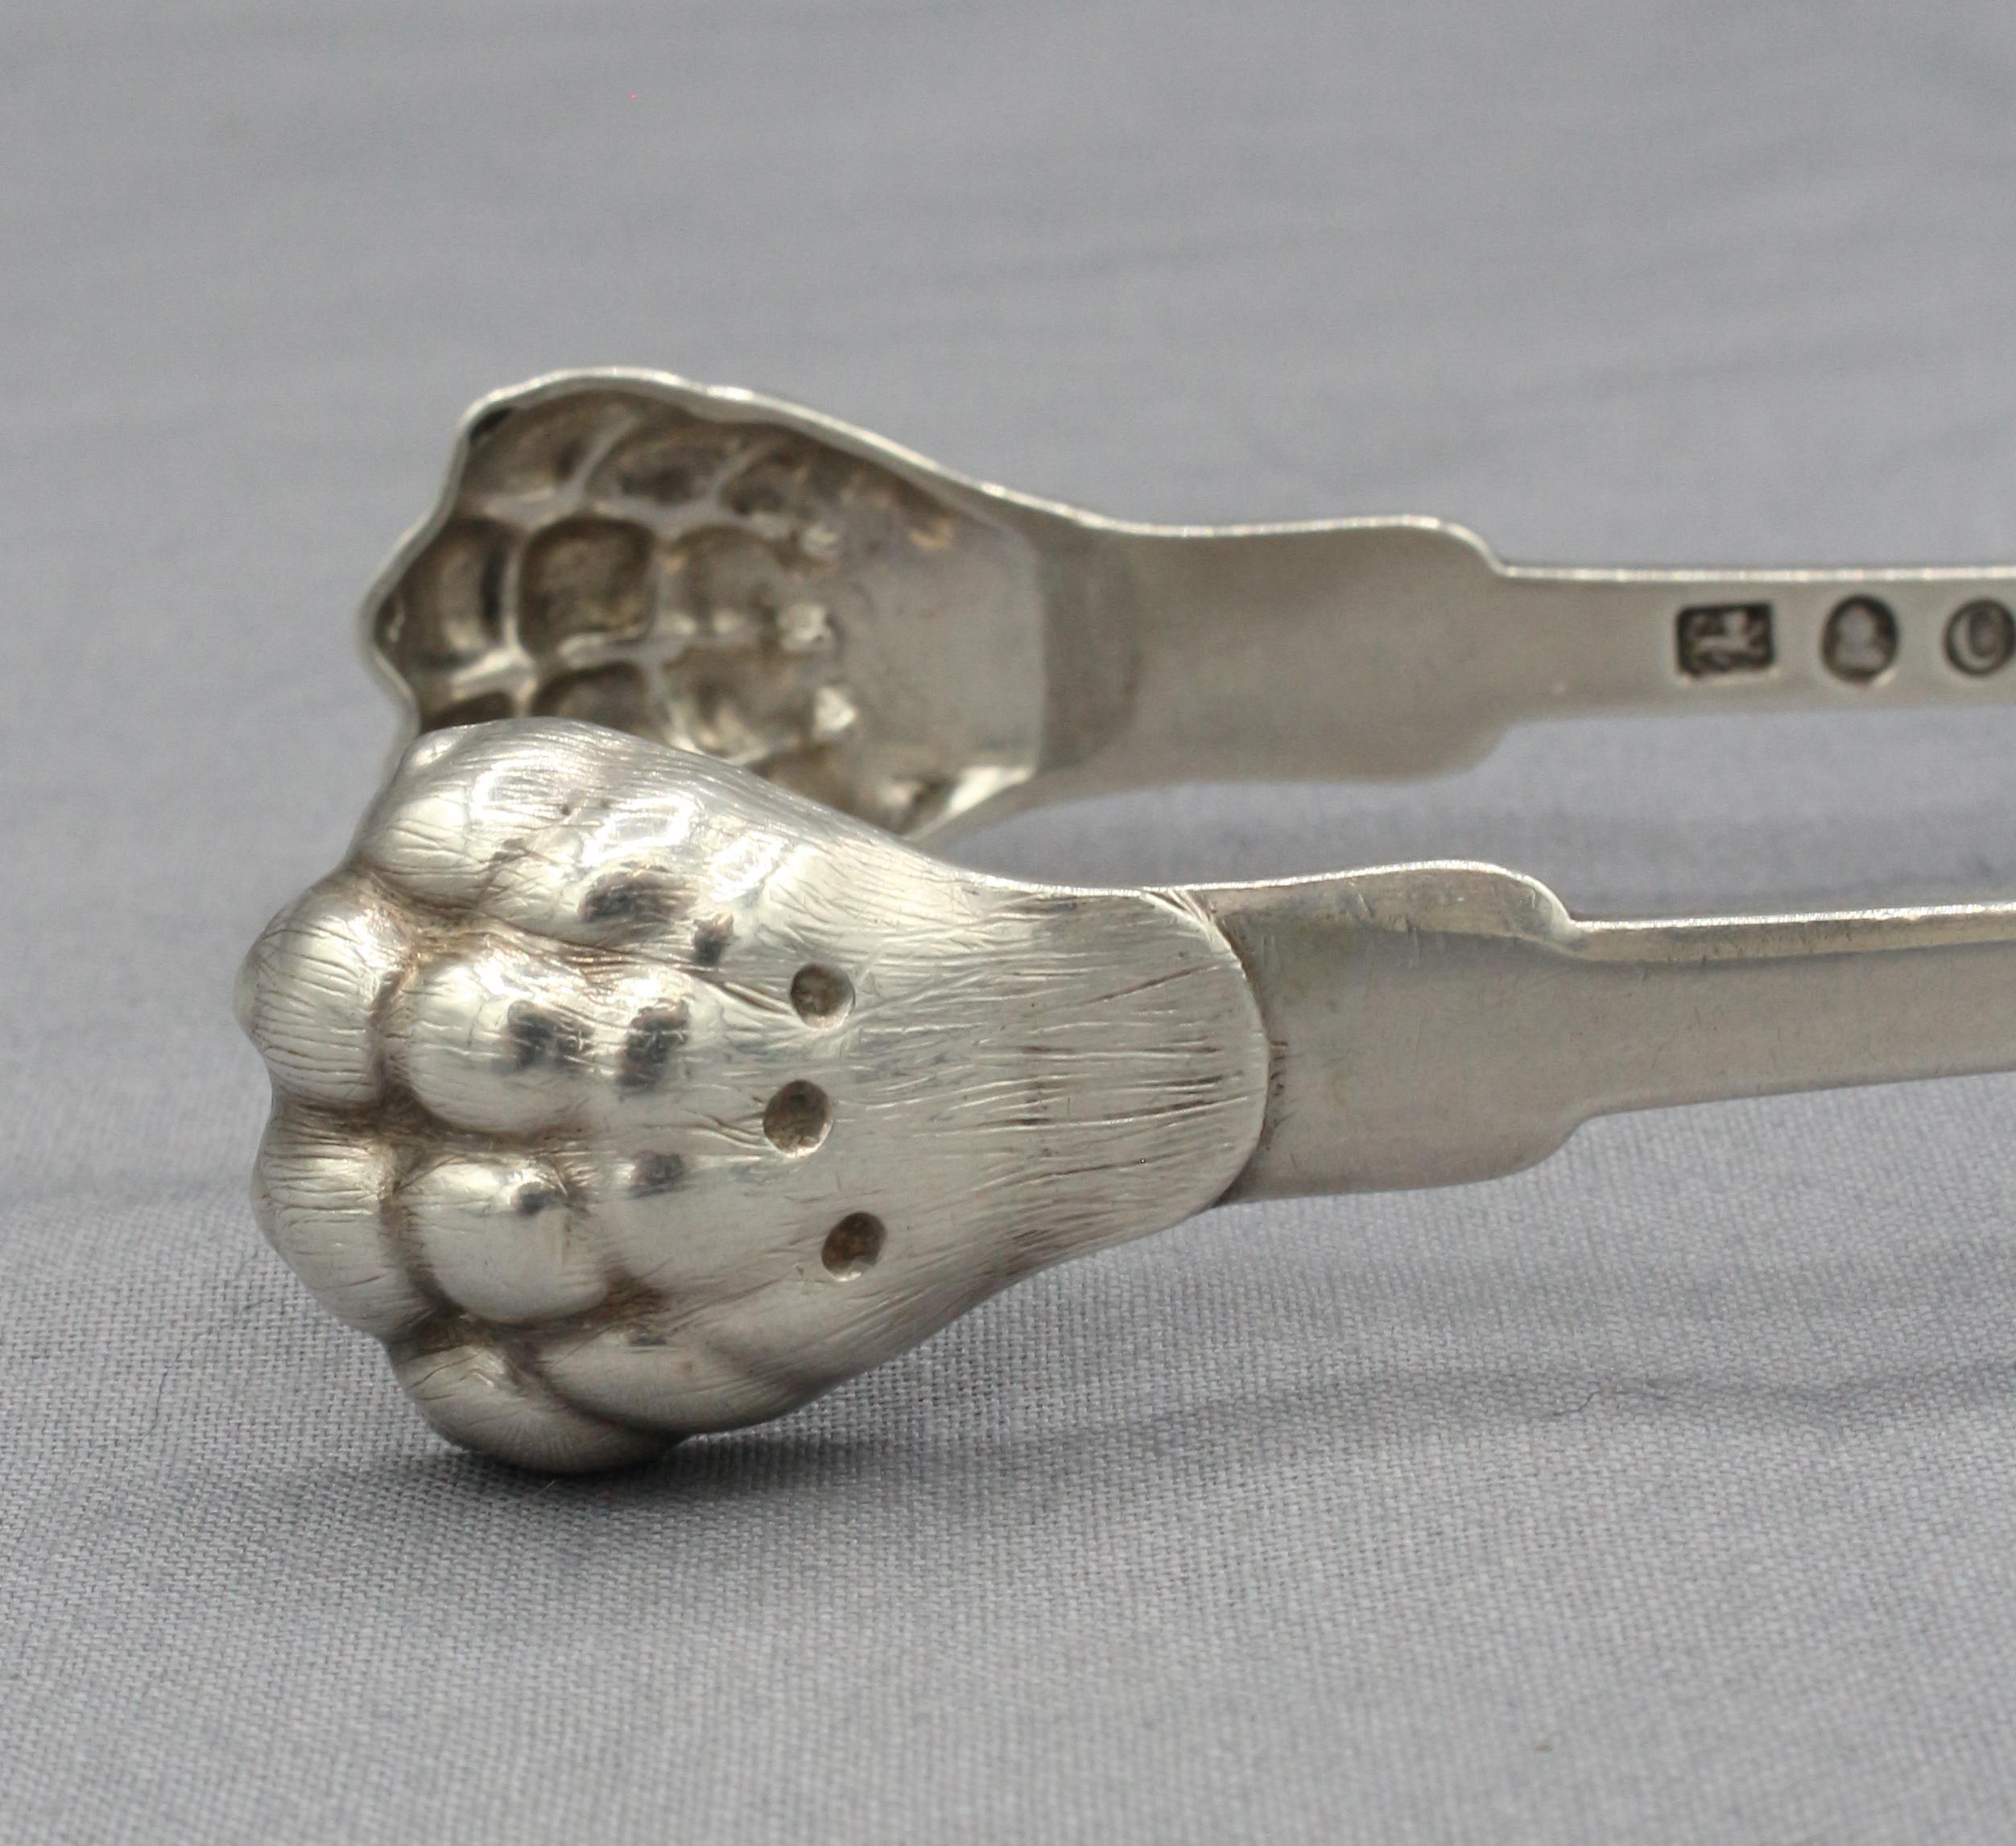 American c. 1815 Coin Silver Sugar Tongs by William Thompson, Henry Salisbury, & George E